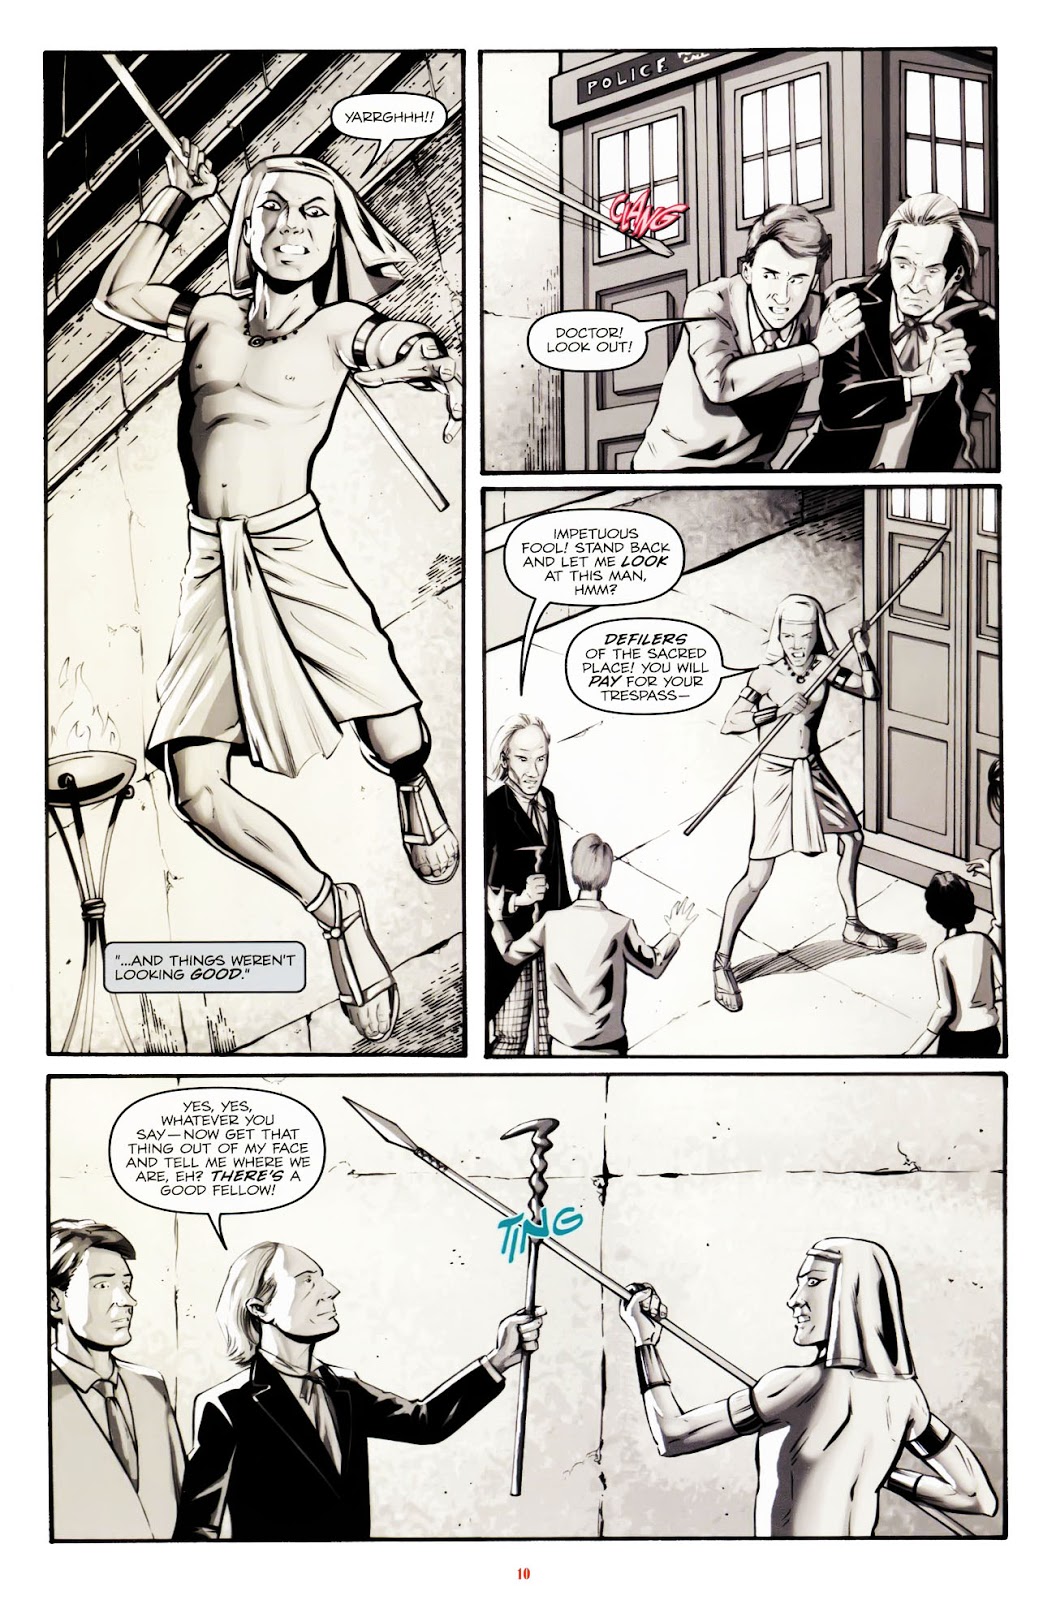 Doctor Who: The Forgotten issue 1 - Page 12